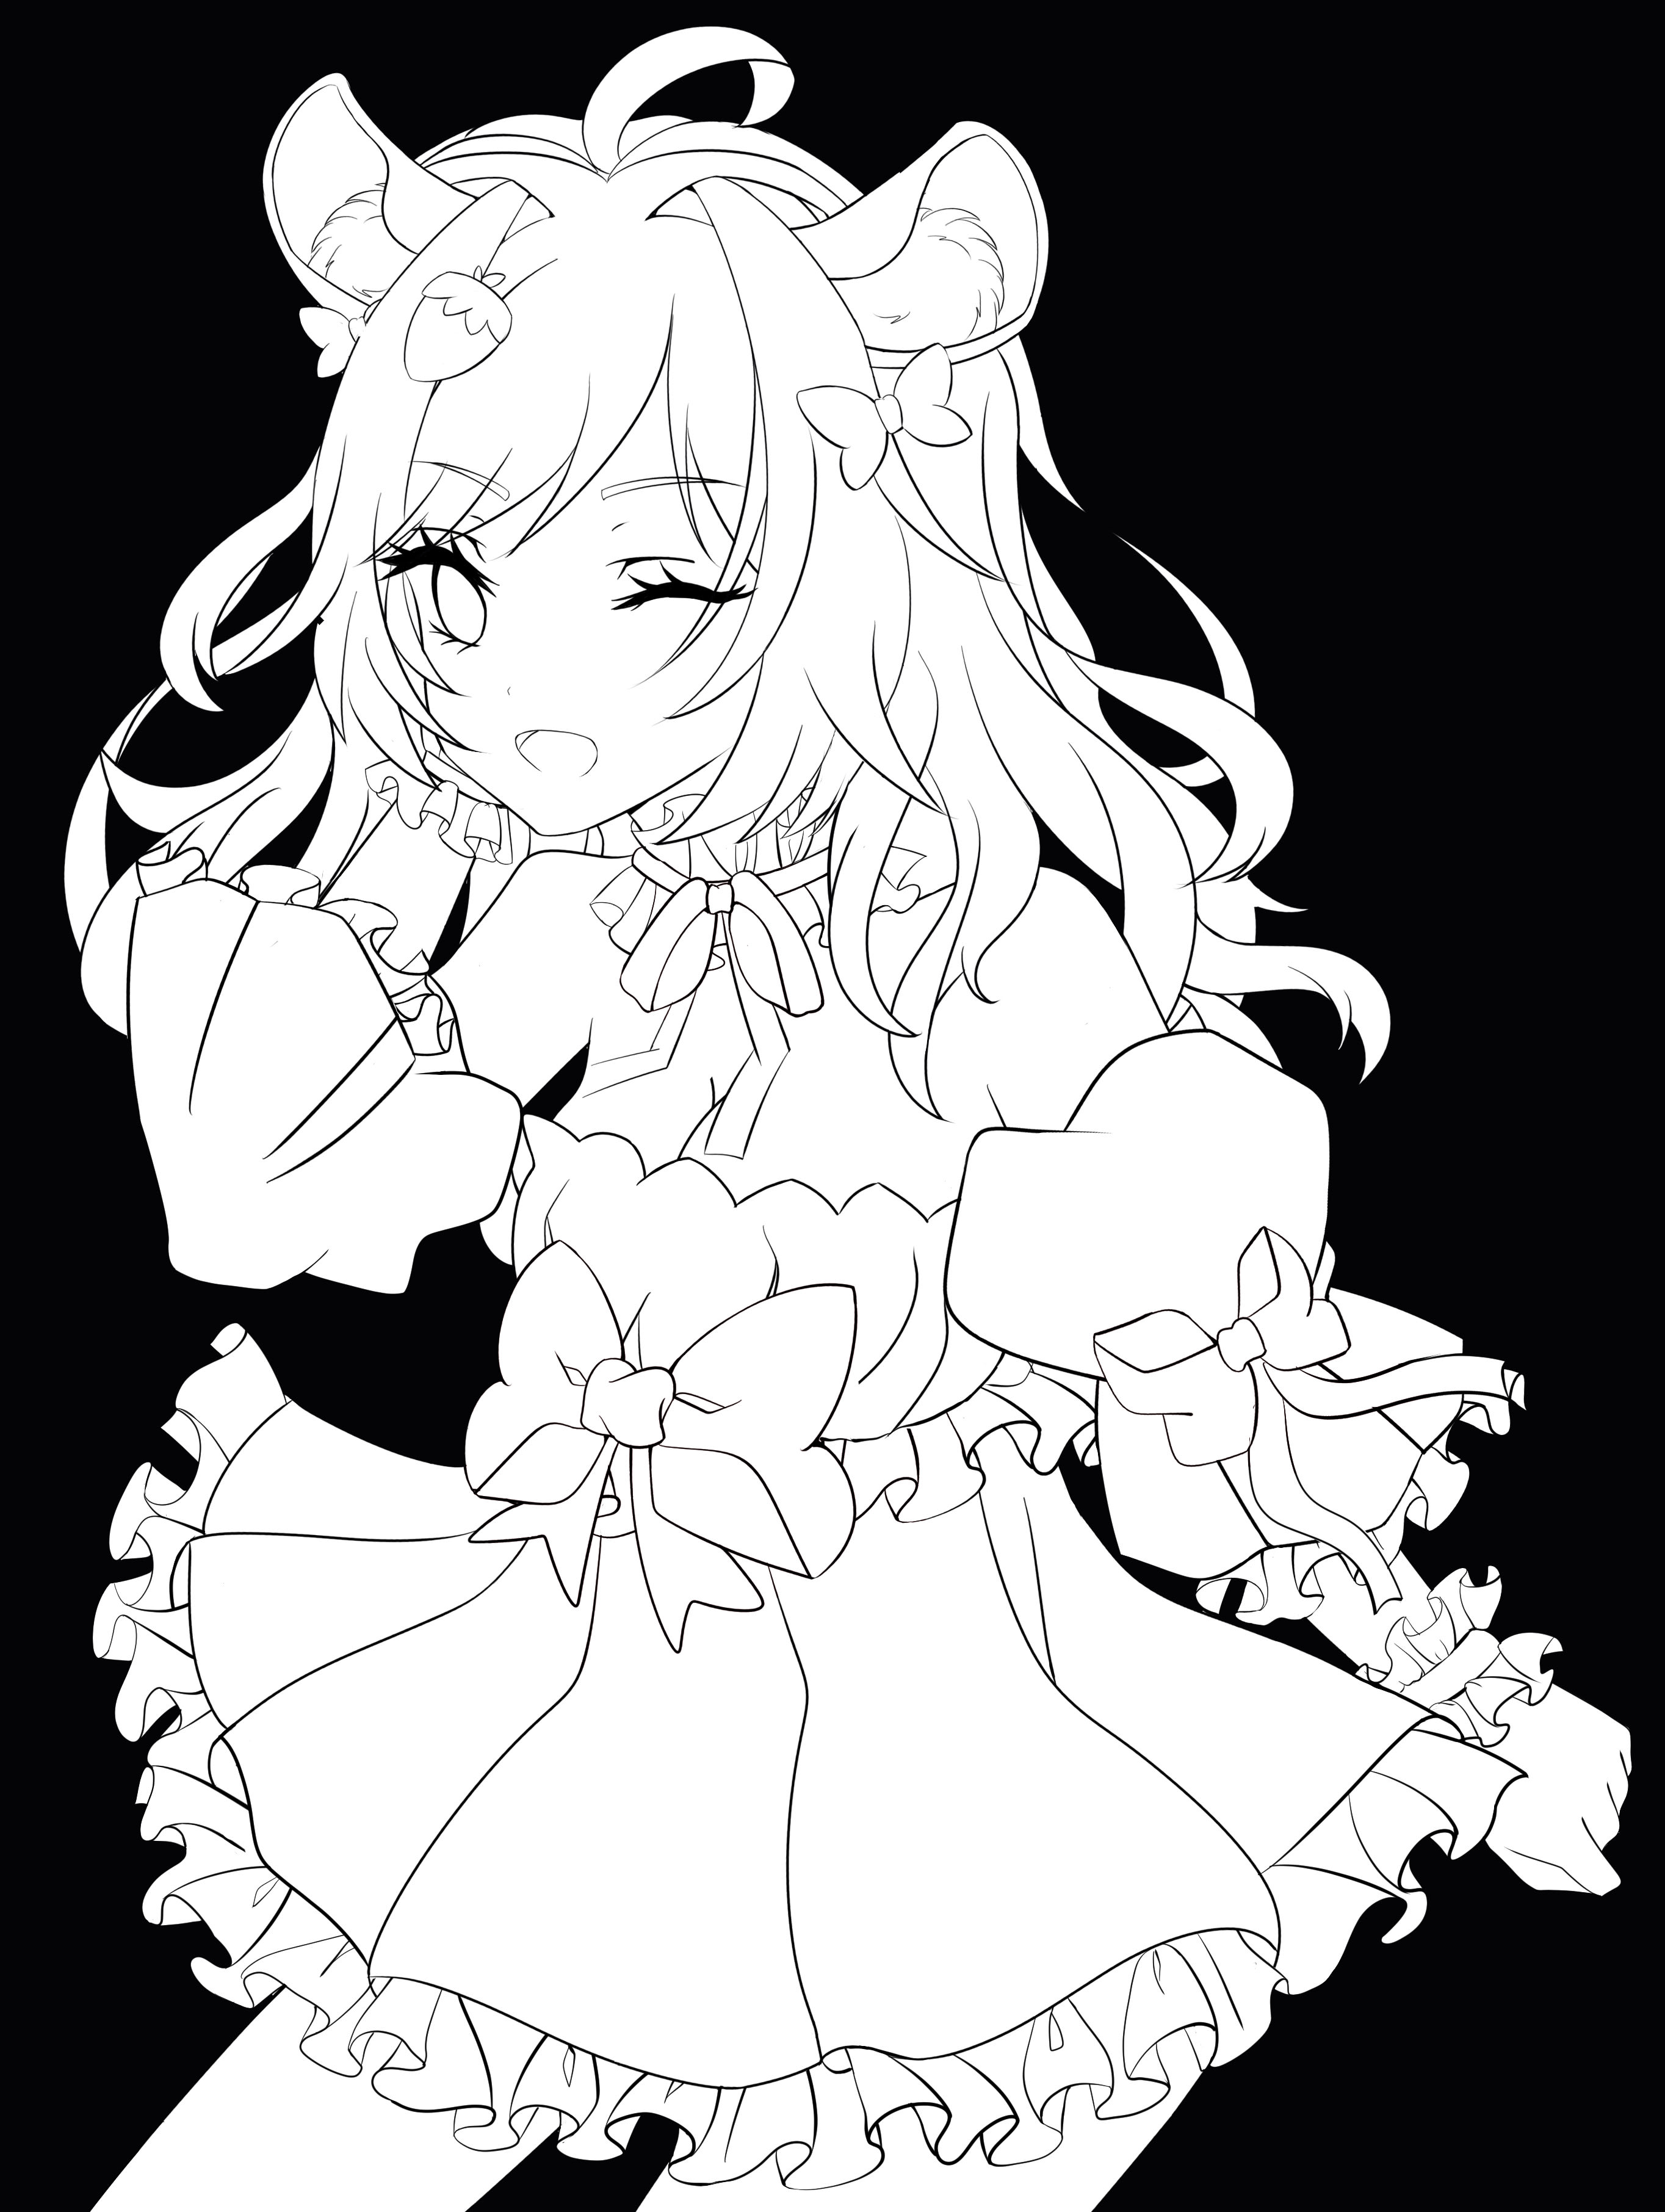 Simple Anime Lineart (Black & White) - Artists&Clients